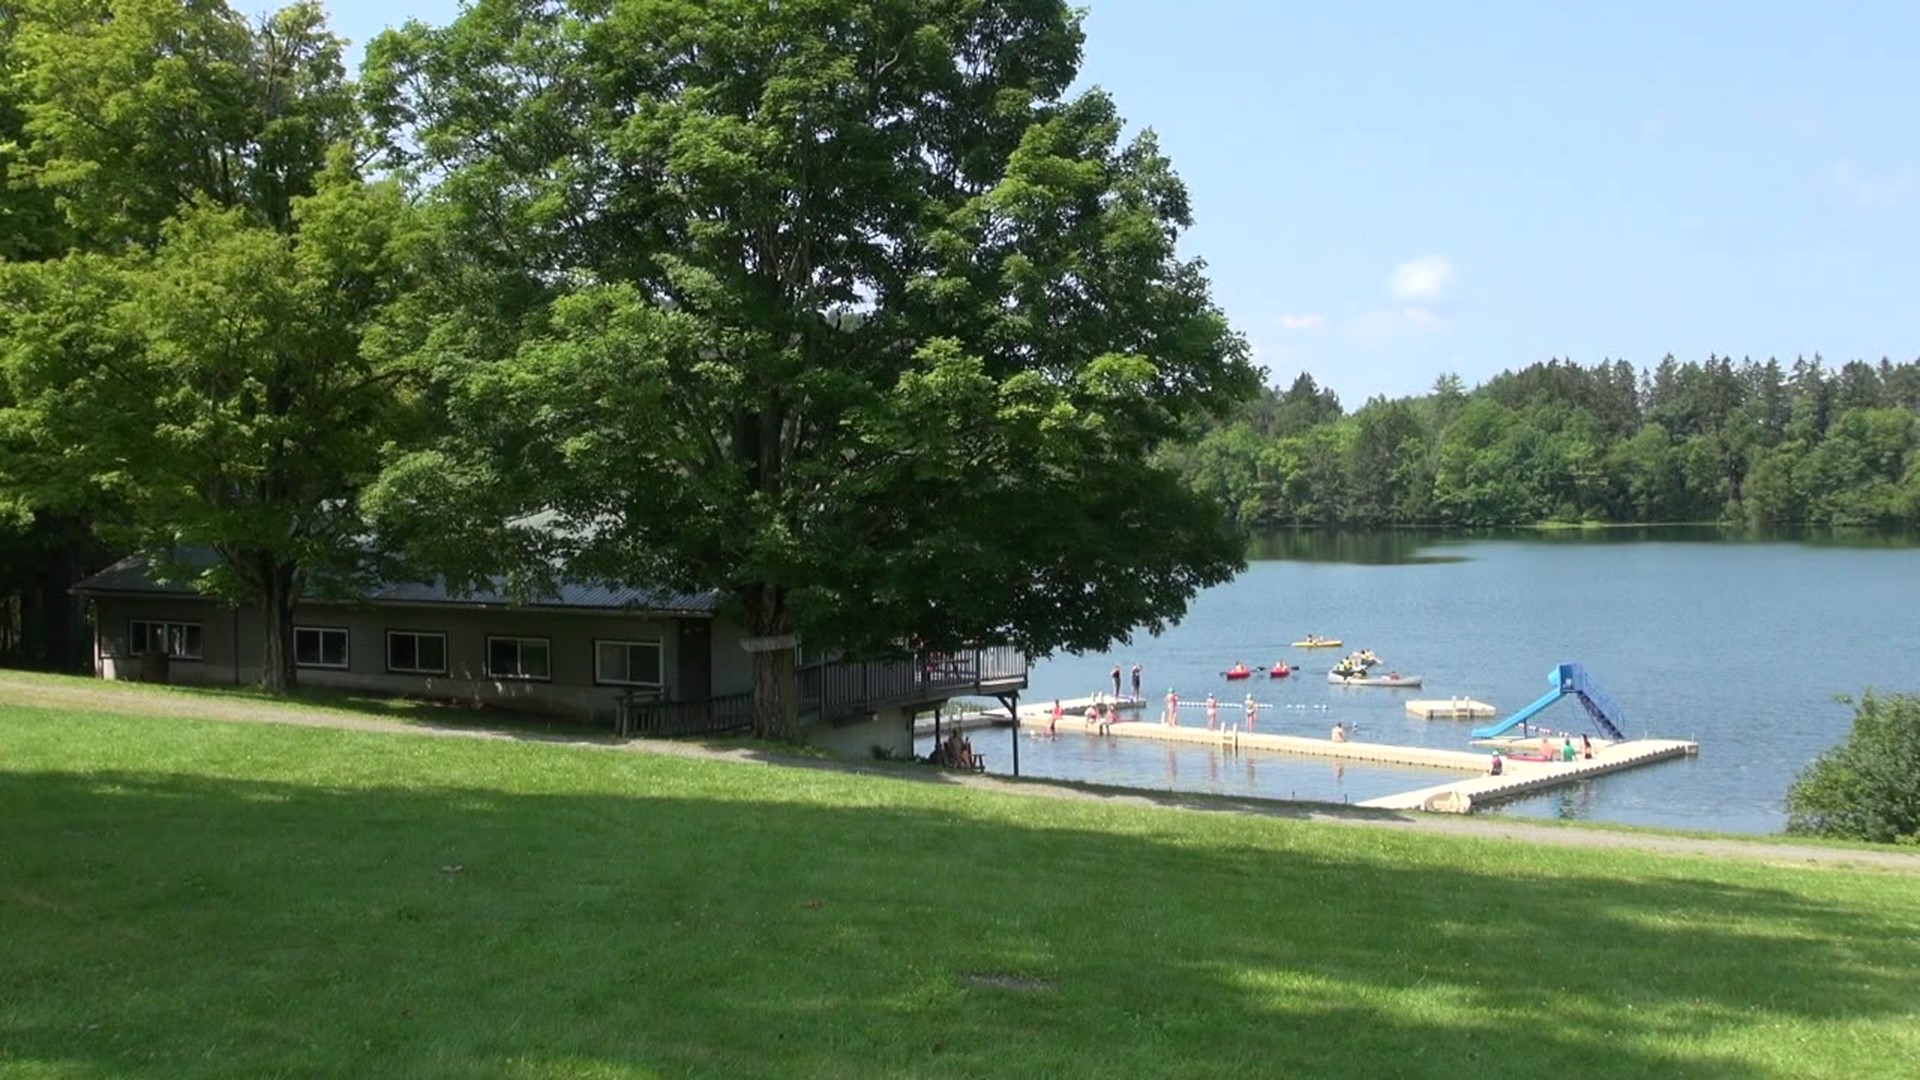 After a year off from the pandemic, the camp in Susquehanna County has special events planned to mark 100 years and campers feel the history.